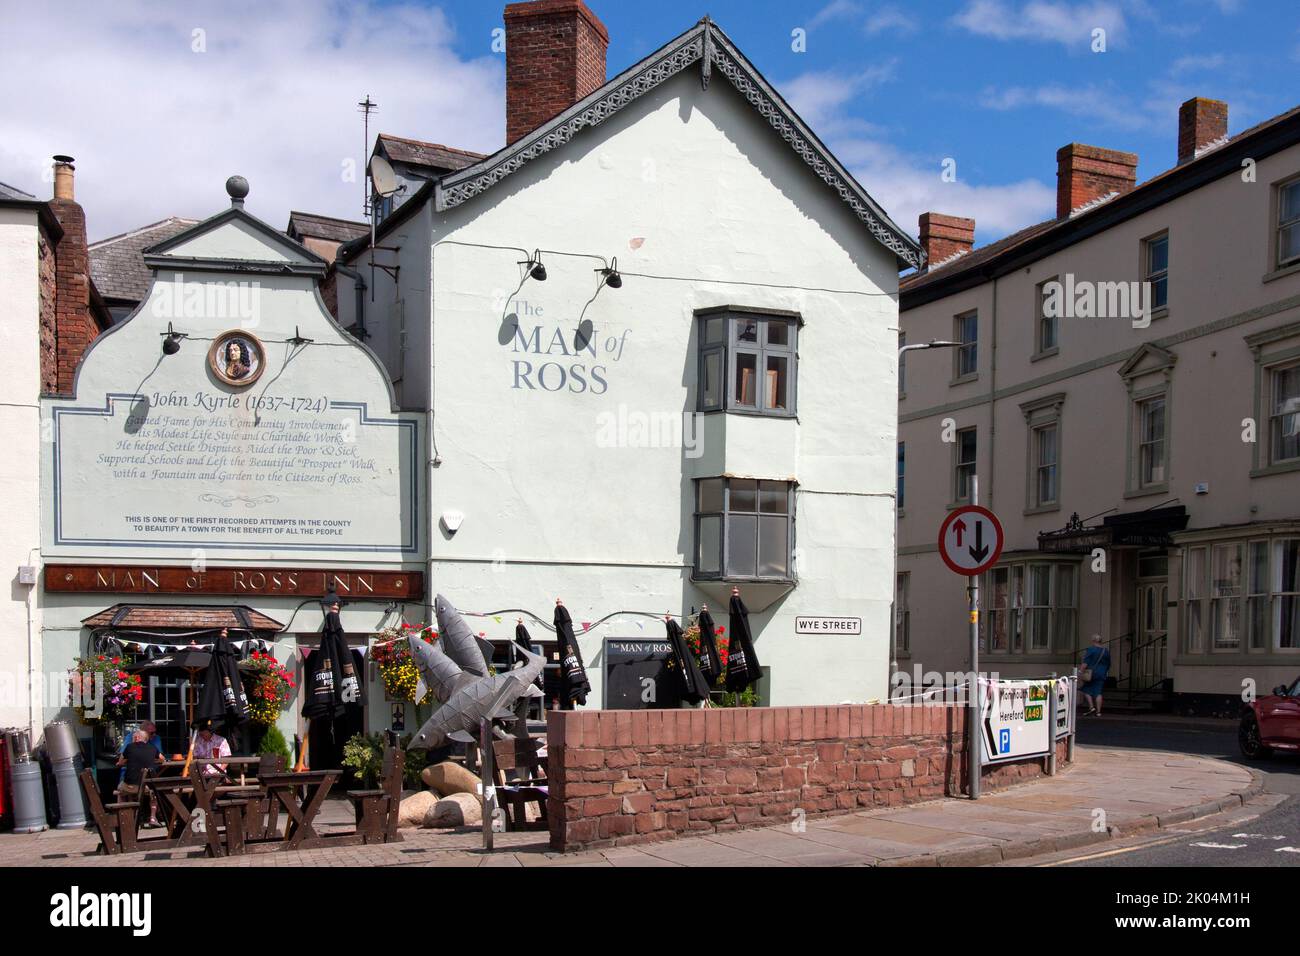 Man of Ross pub, Ross on Wye, Forest of Dean, Herefordshire, England Stock Photo